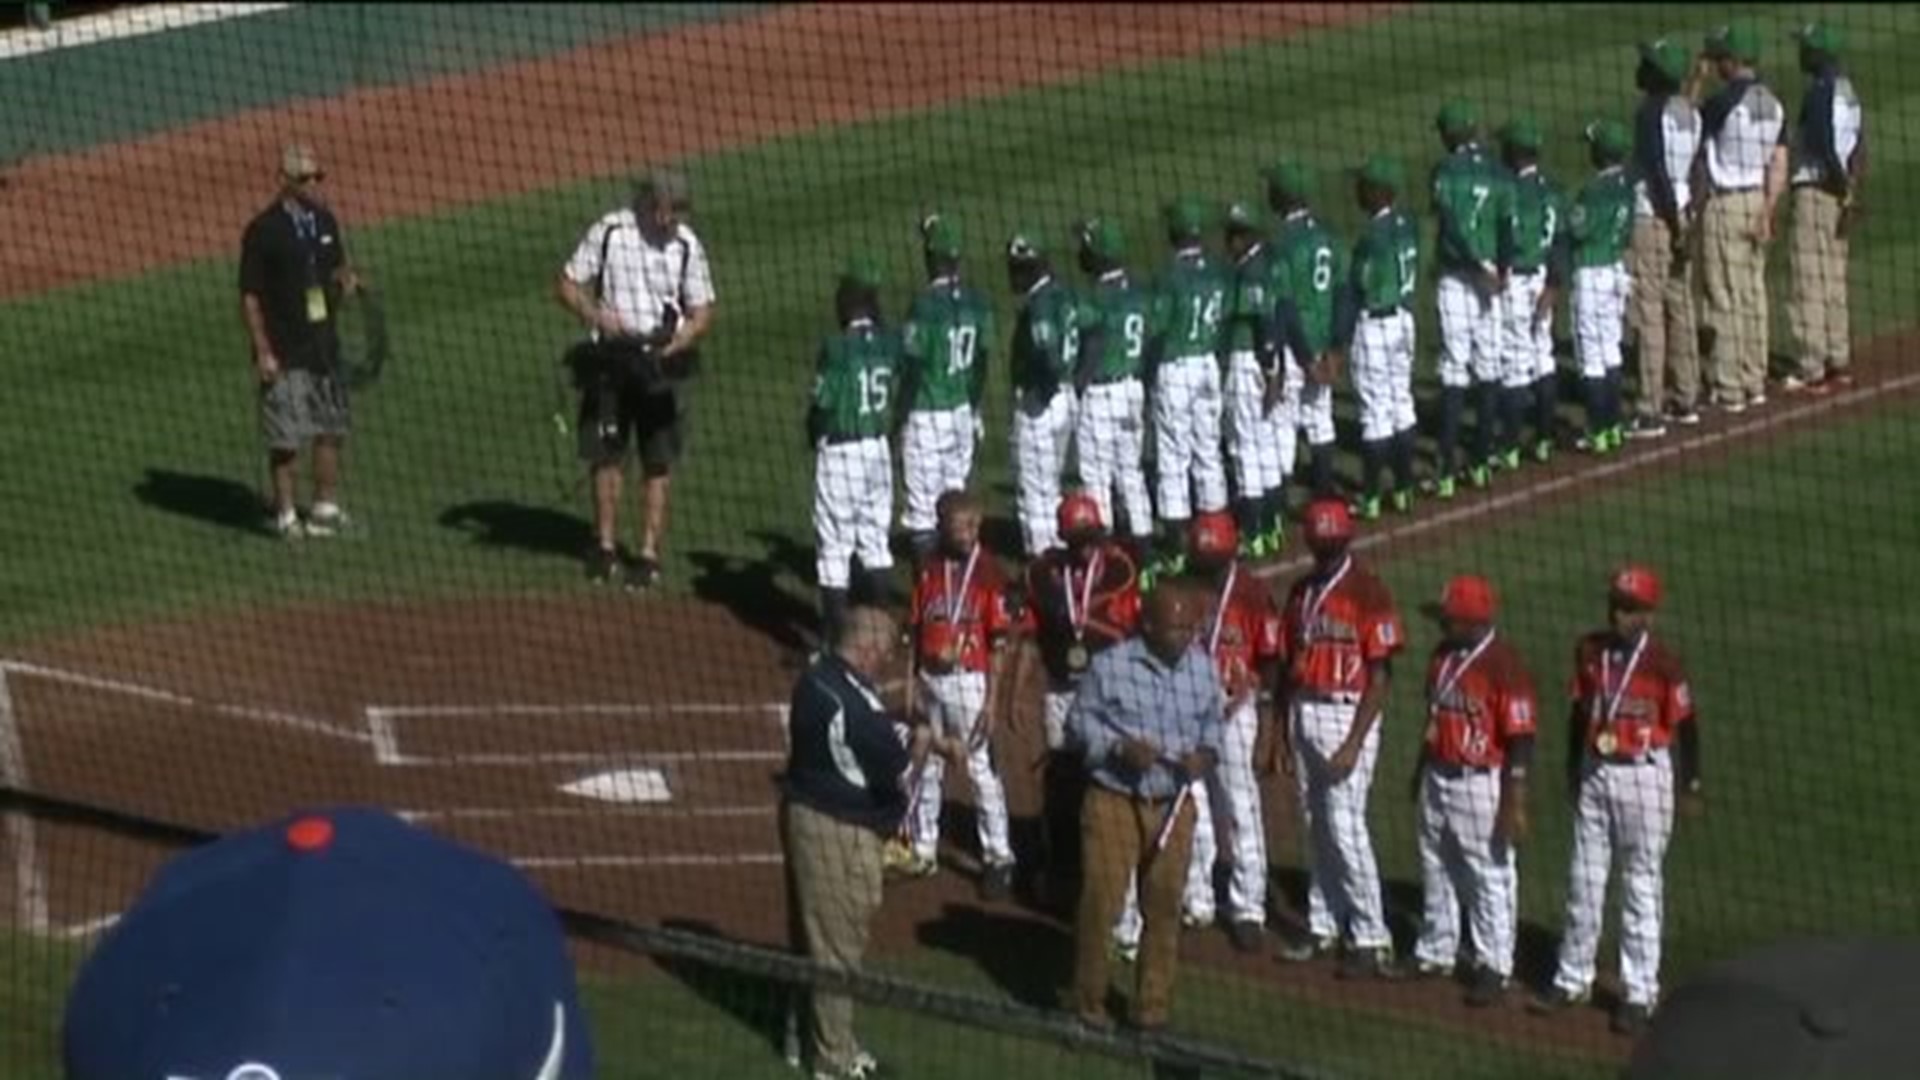 History Made at the Little League World Series